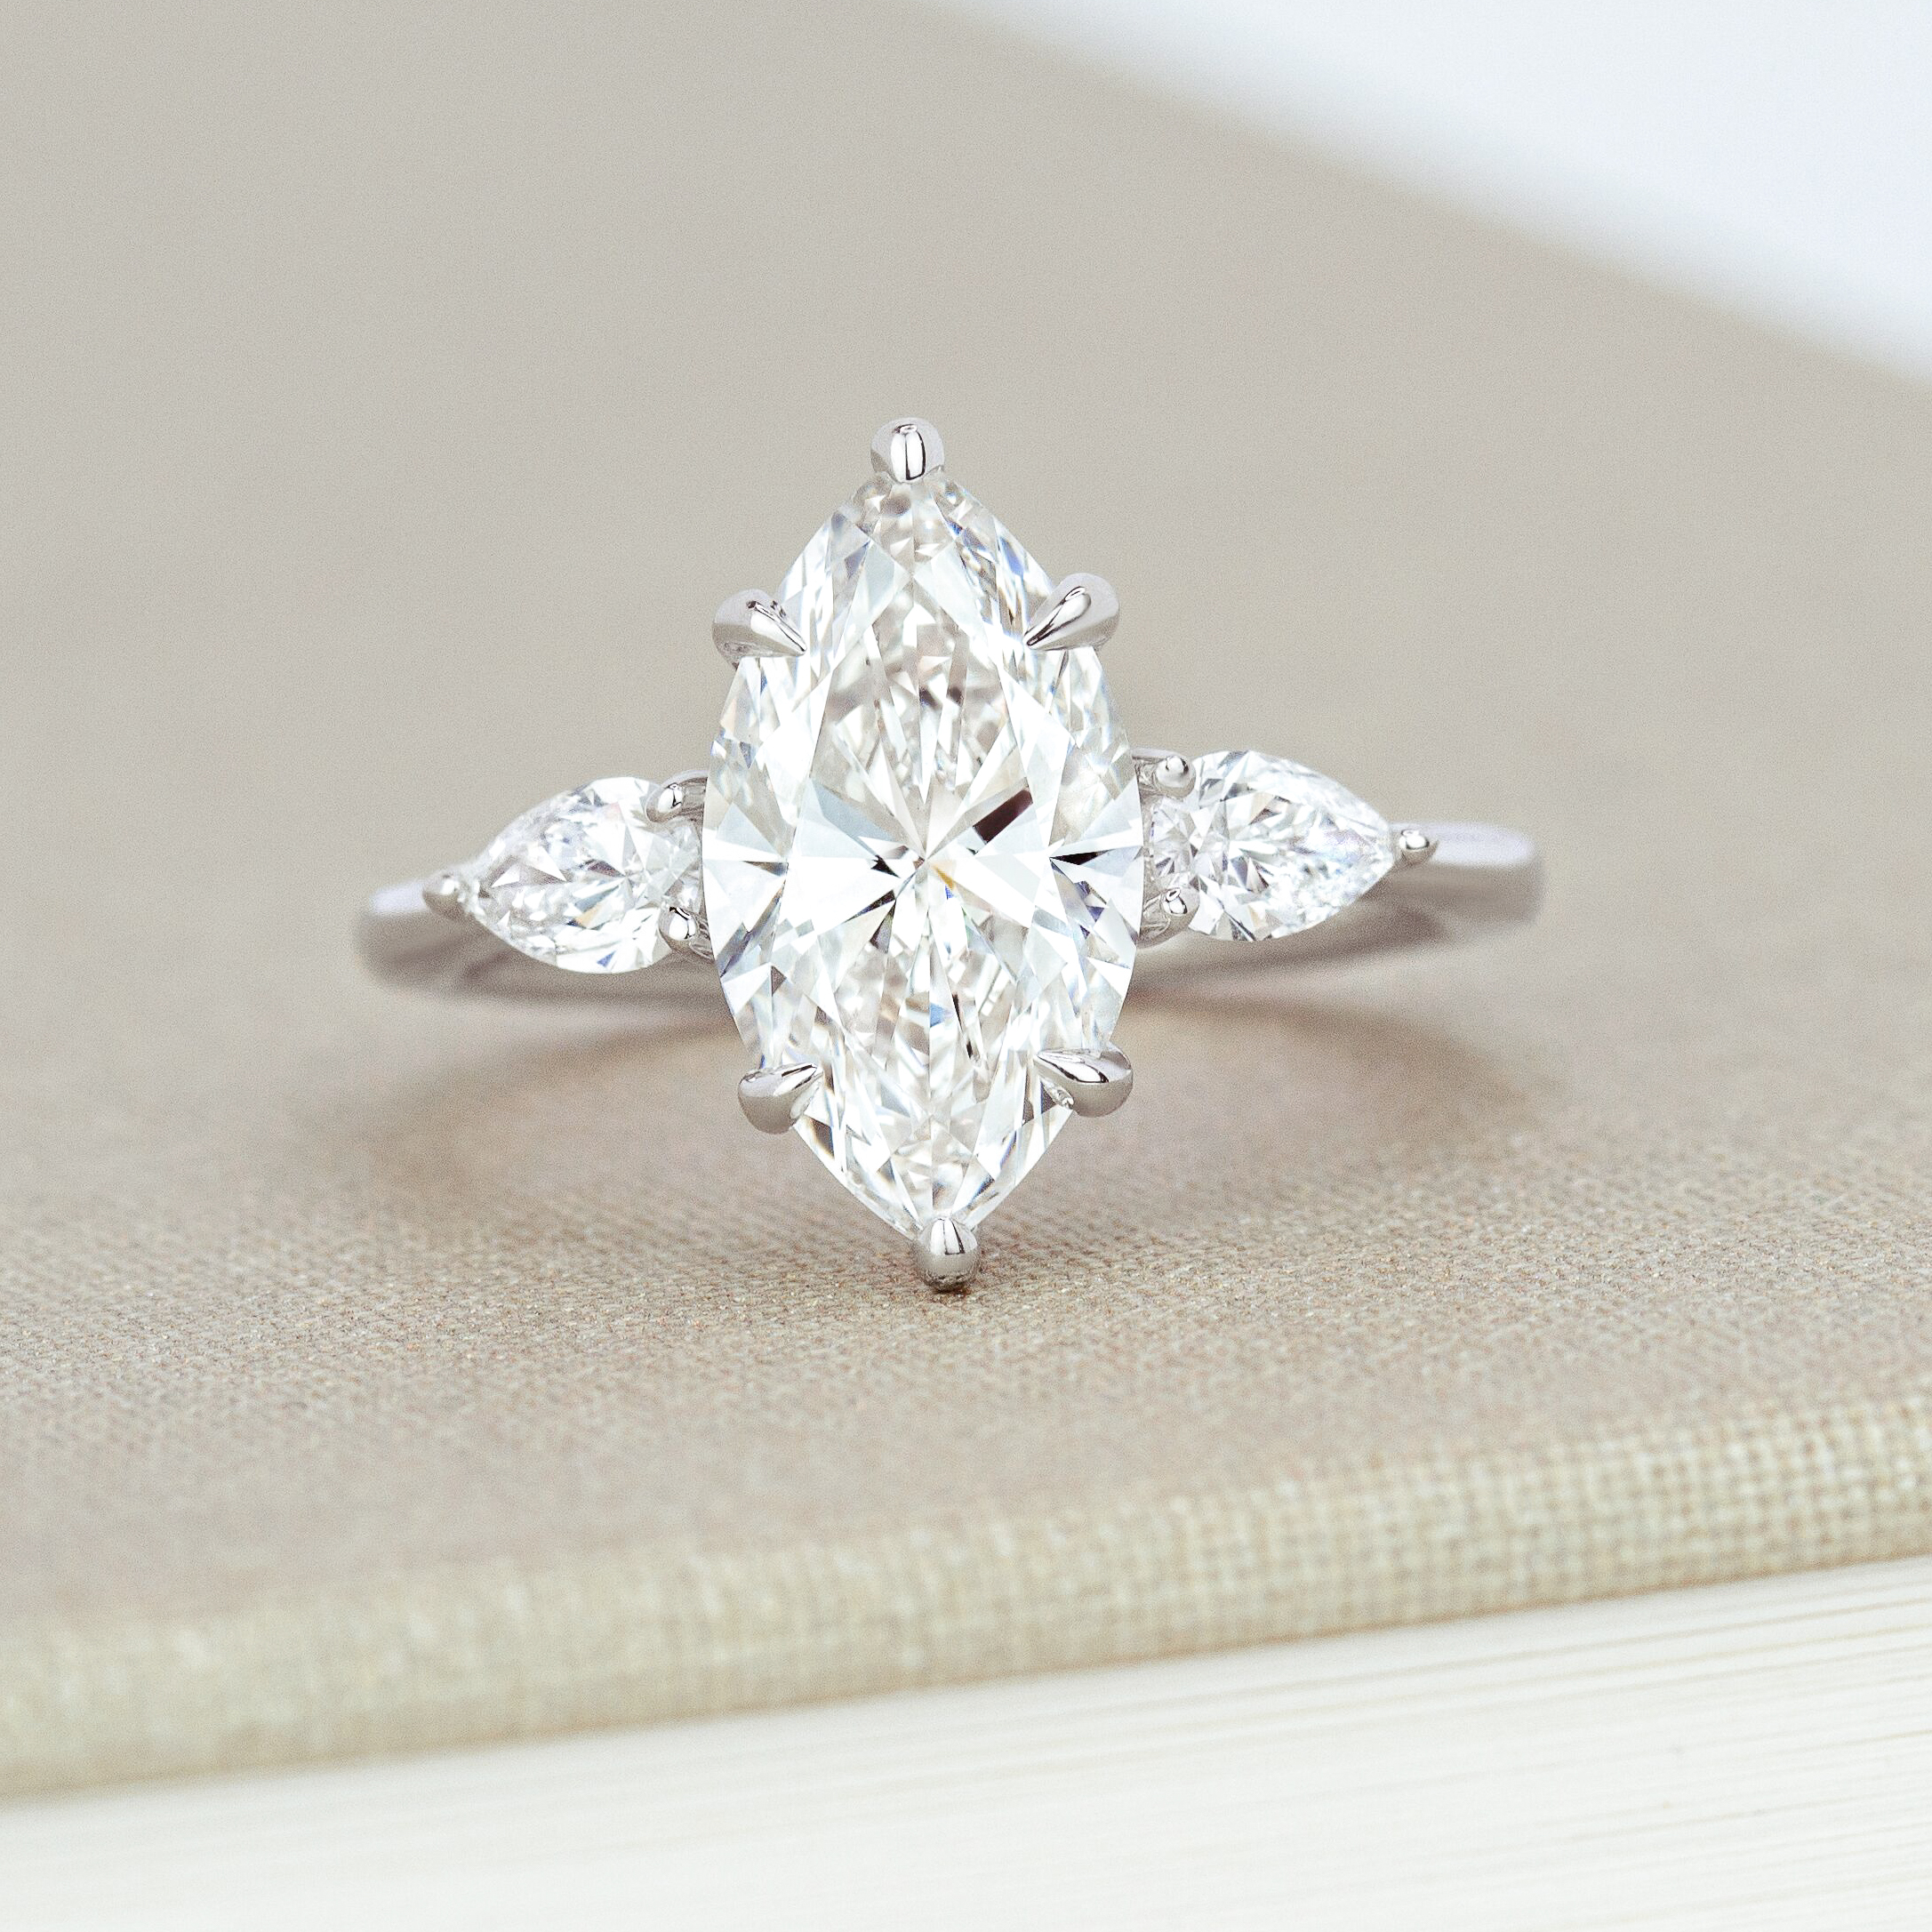 The Do's and Don'ts of DIY Diamond Jewelry Cleaning and Care